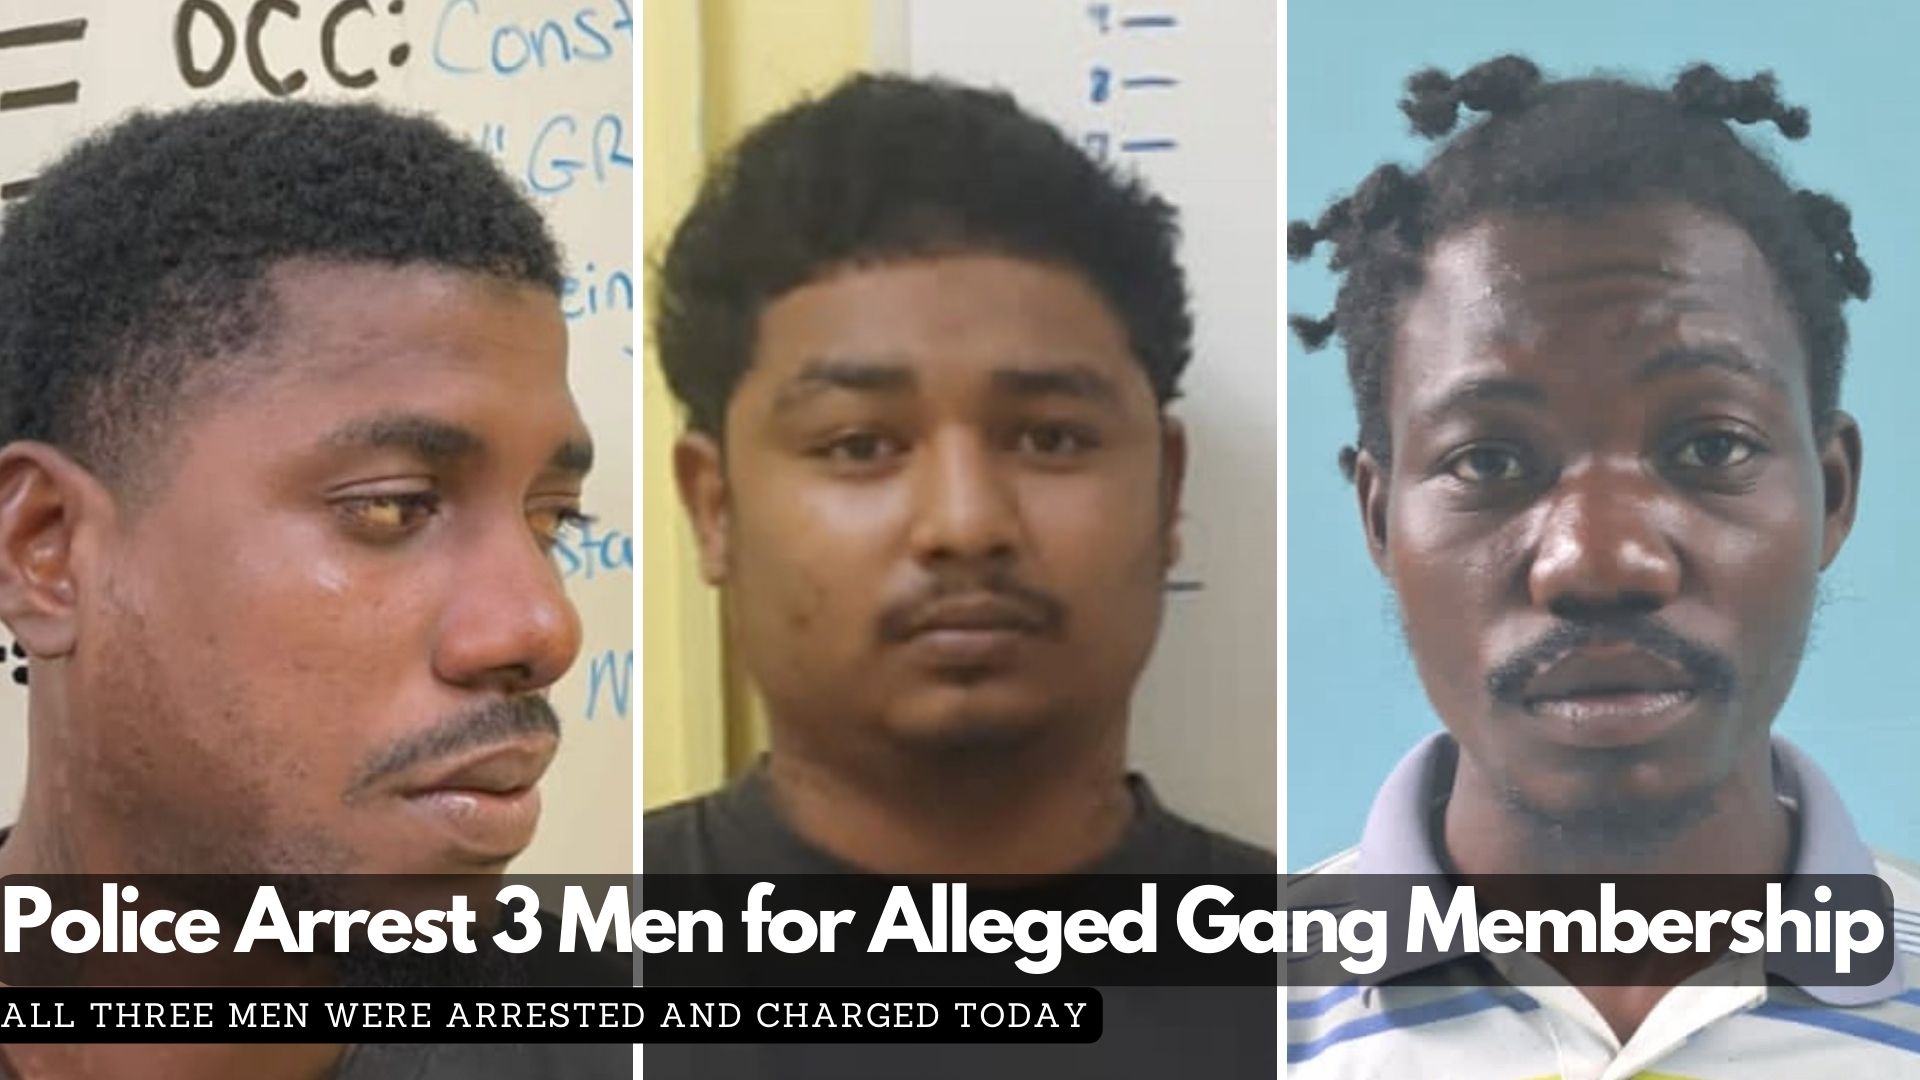 On Wednesday, May 1, 2024, police arrested and charged Allen Albert Anderson, also known as "Grace," a 24-year-old Belizean construction worker from Ladyville Village, Belize District, for the offense of belonging to a gang. On the same day, Julian Emilio Woodye, a 24-year-old unemployed Belizean from Belize City, was arrested and charged for the same offense. Also on Wednesday, May 1, 2024, Kenyon Carlton Flores, a 23-year-old Belizean construction worker from Belize City, was formally arrested and charged with being a member of a gang.